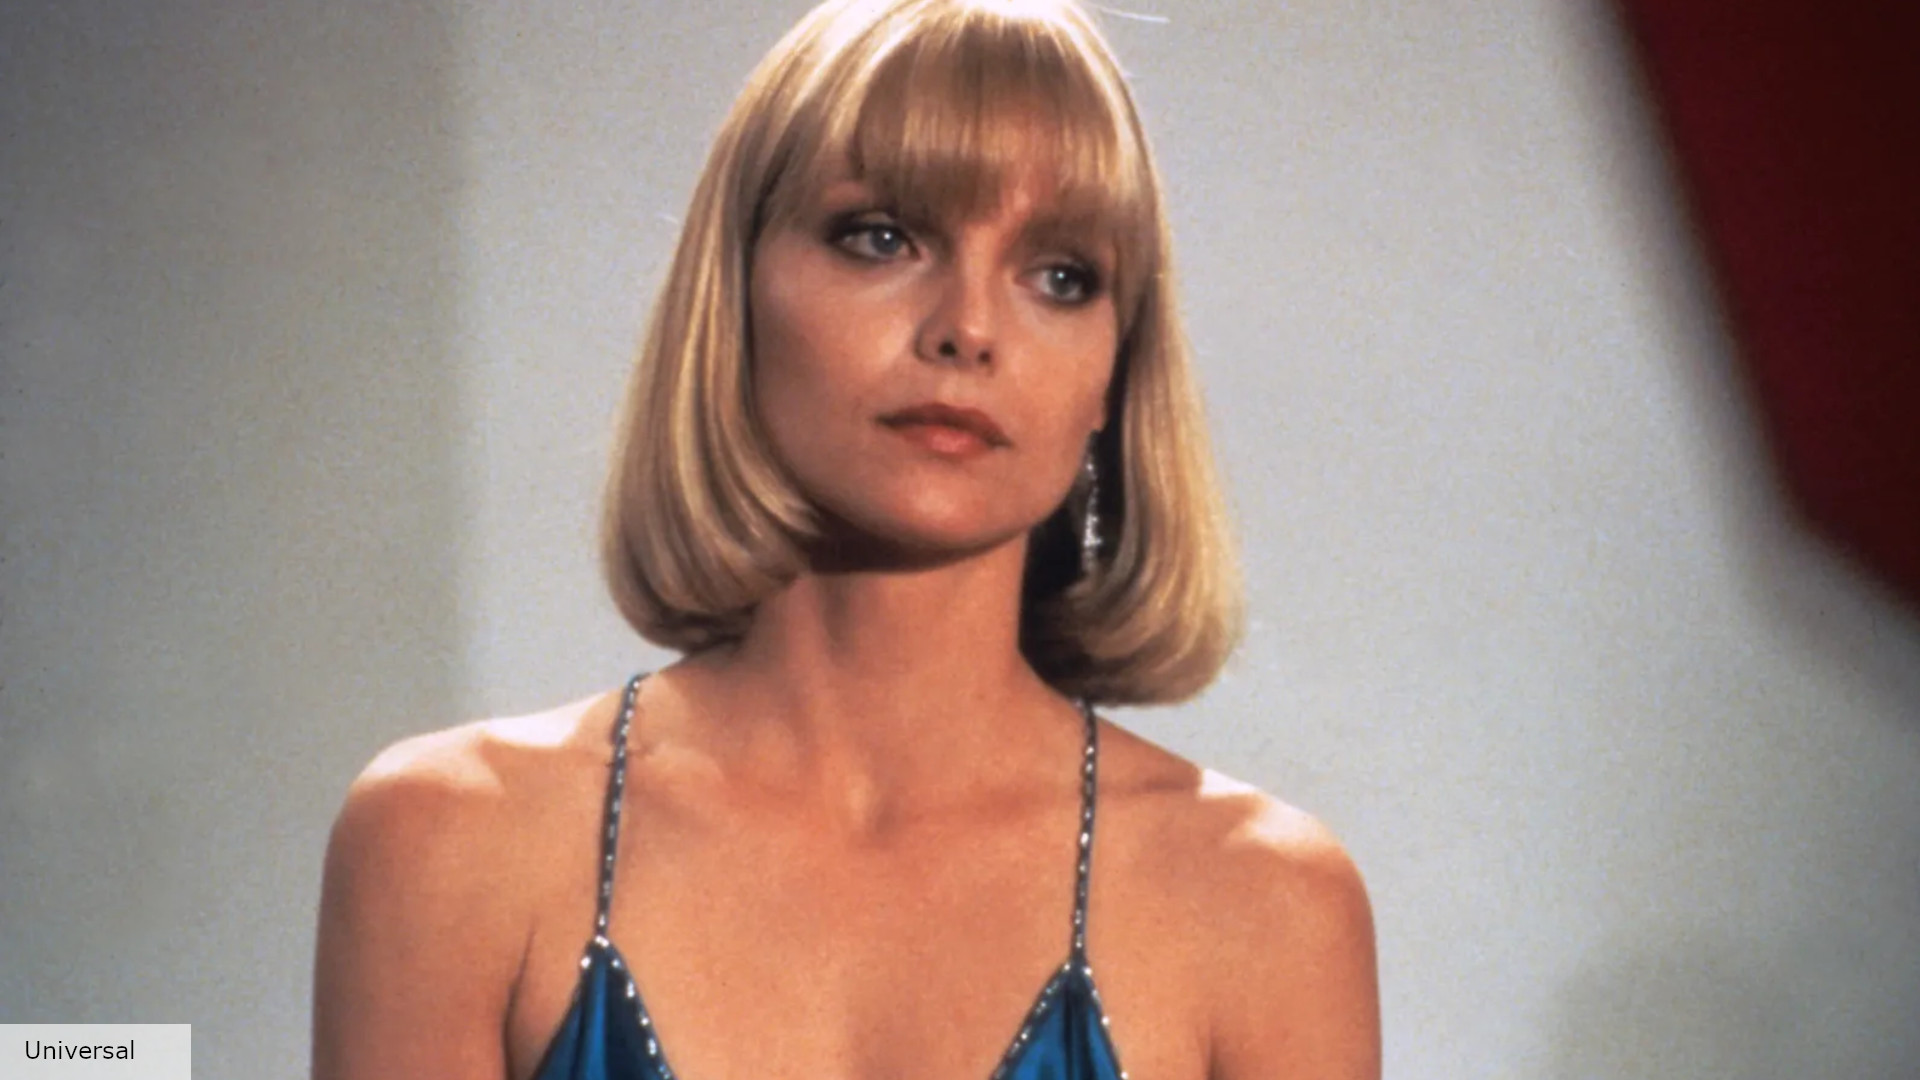 1. Michelle Pfeiffer's Iconic Blonde Hair in "Scarface" - wide 2